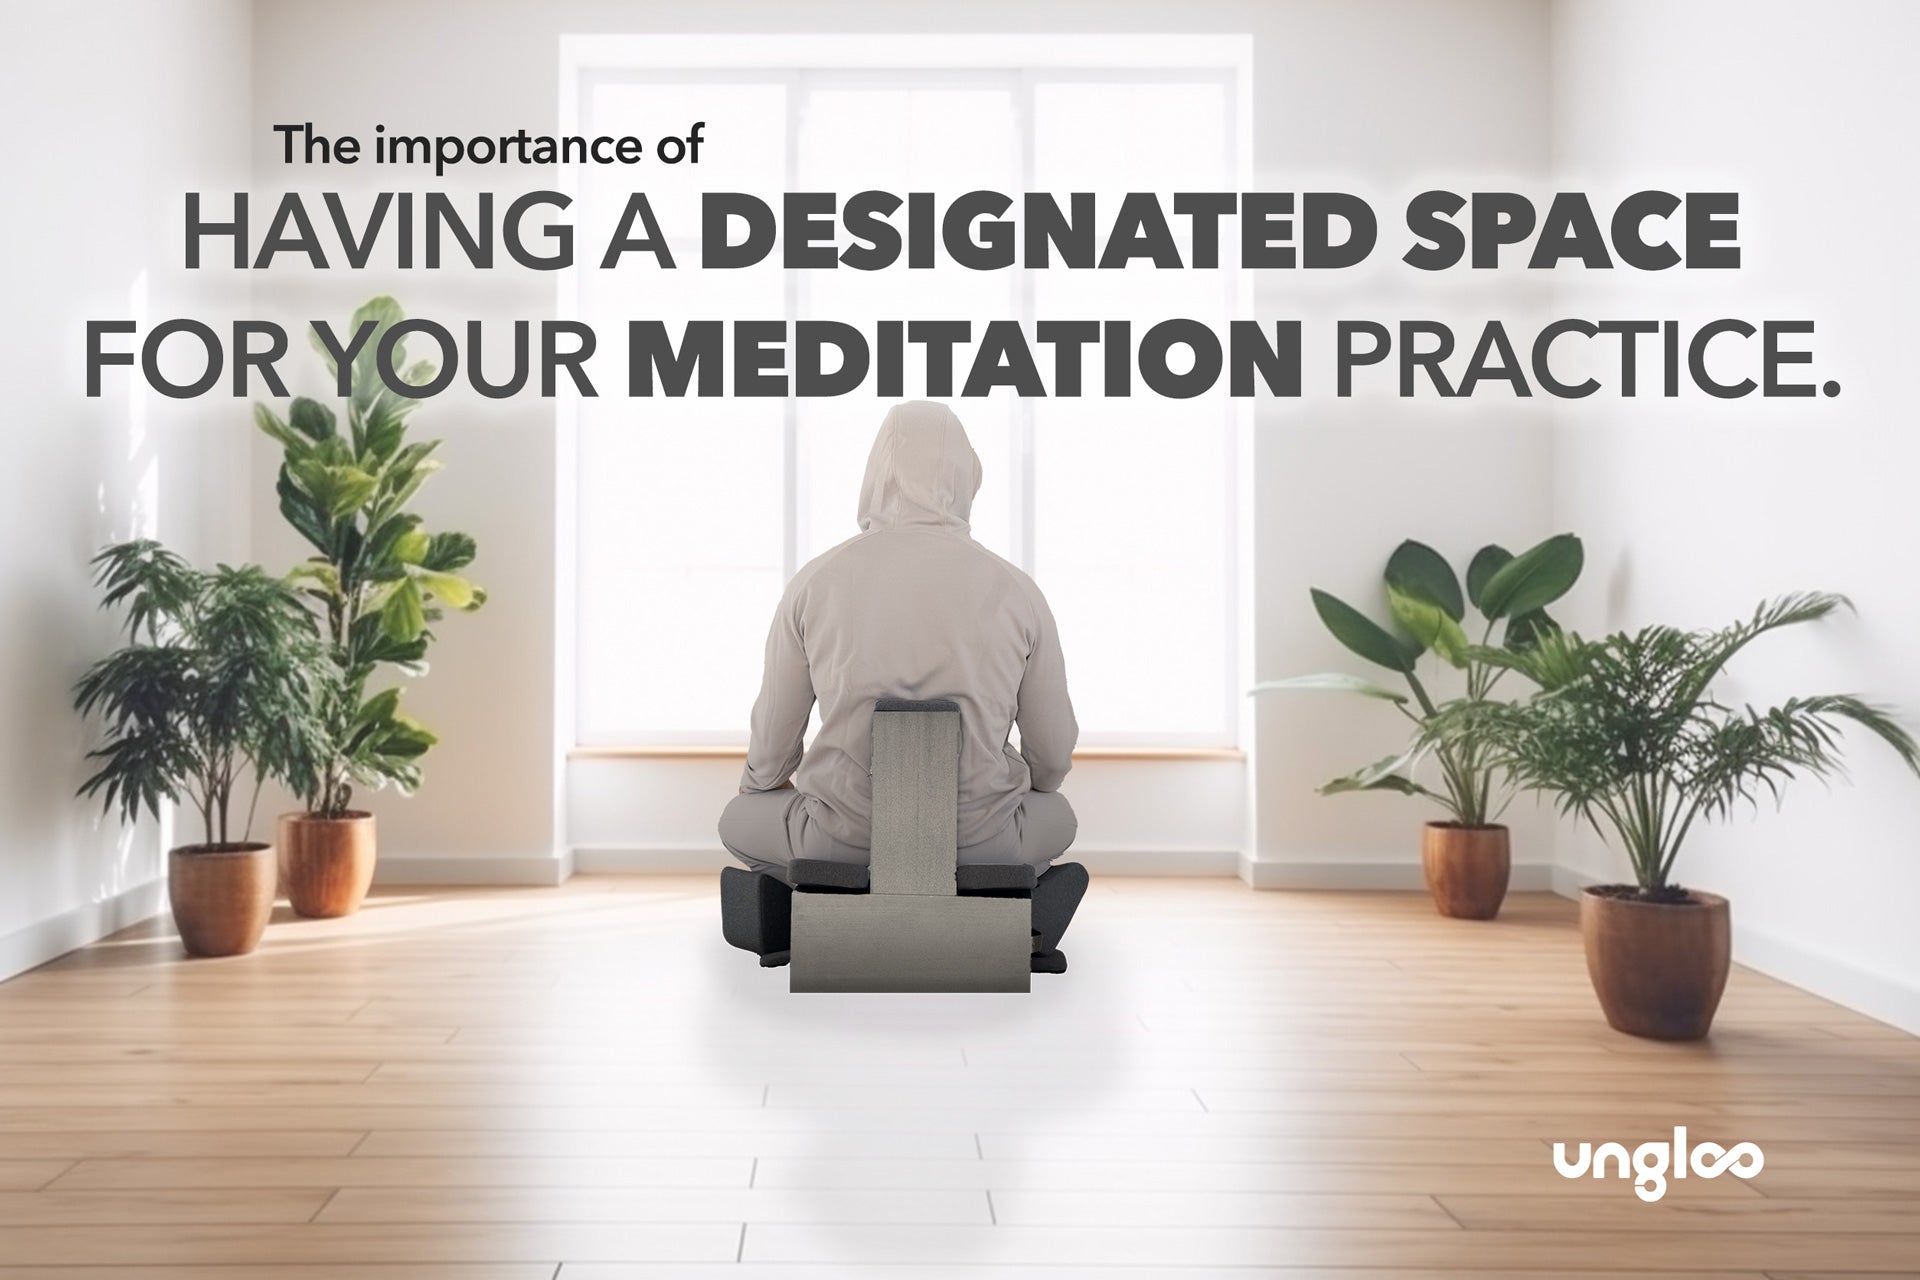 Having Designated Space for Your Meditation Practice